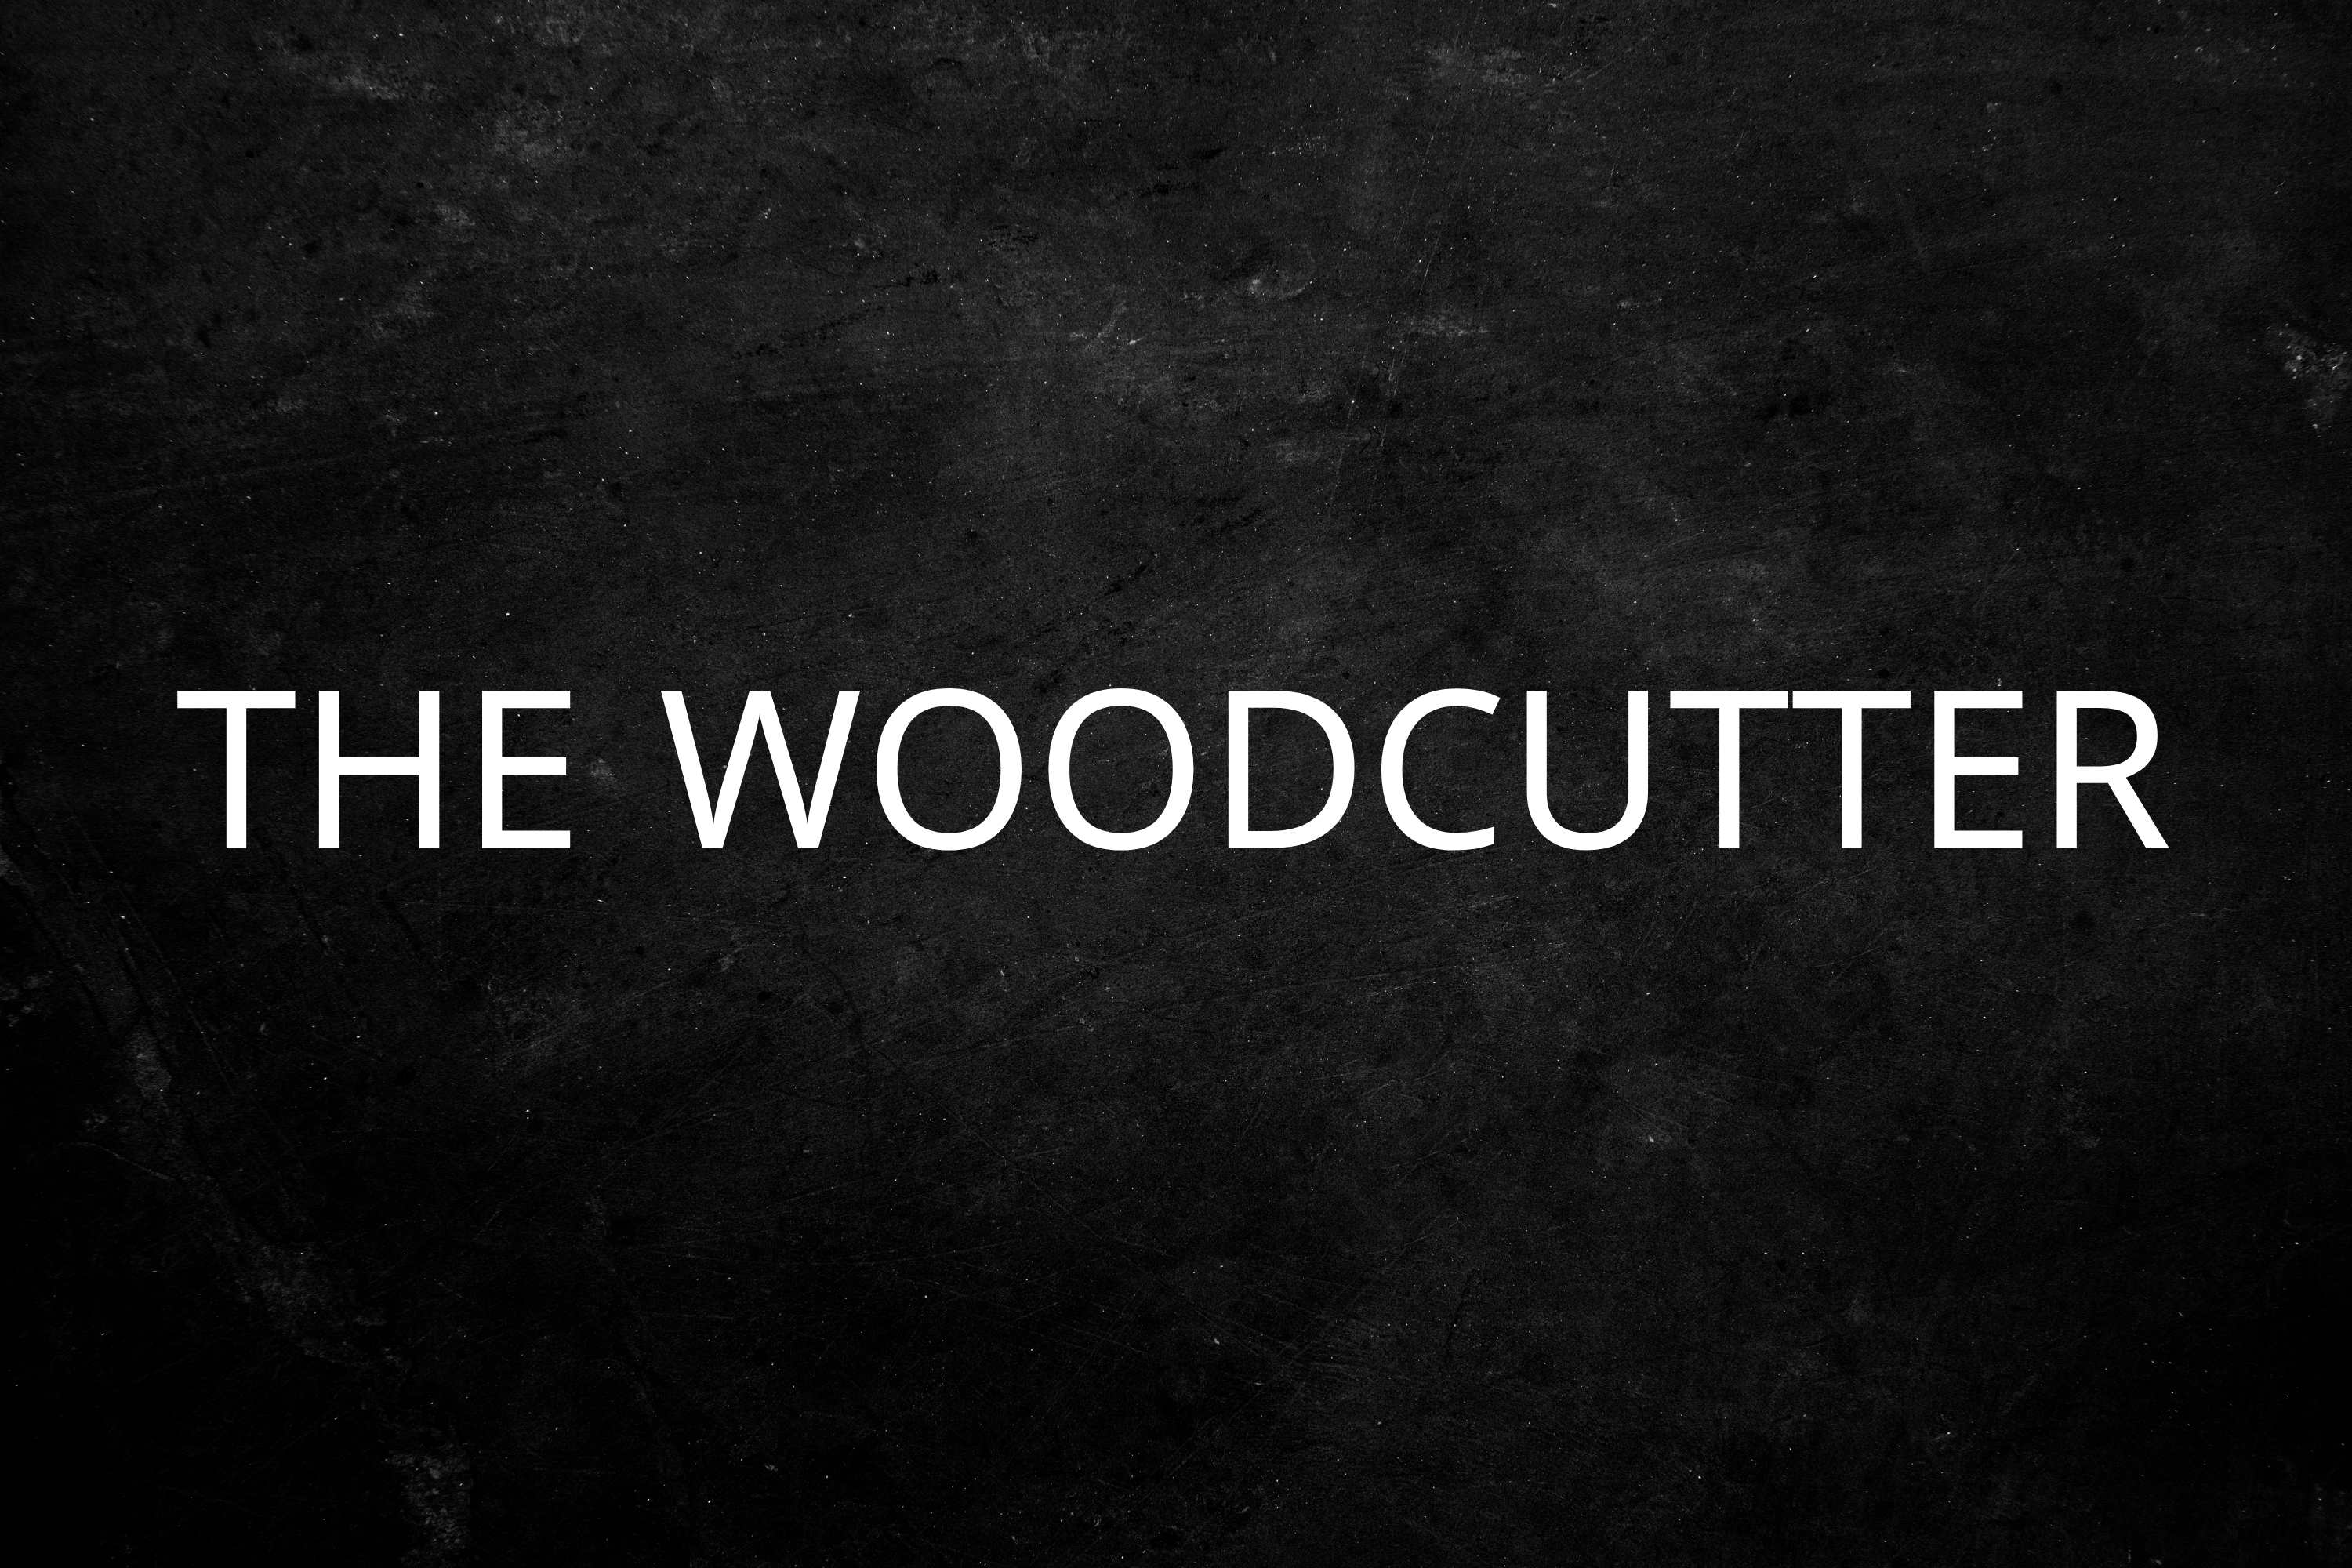 THE WOODCUTTER